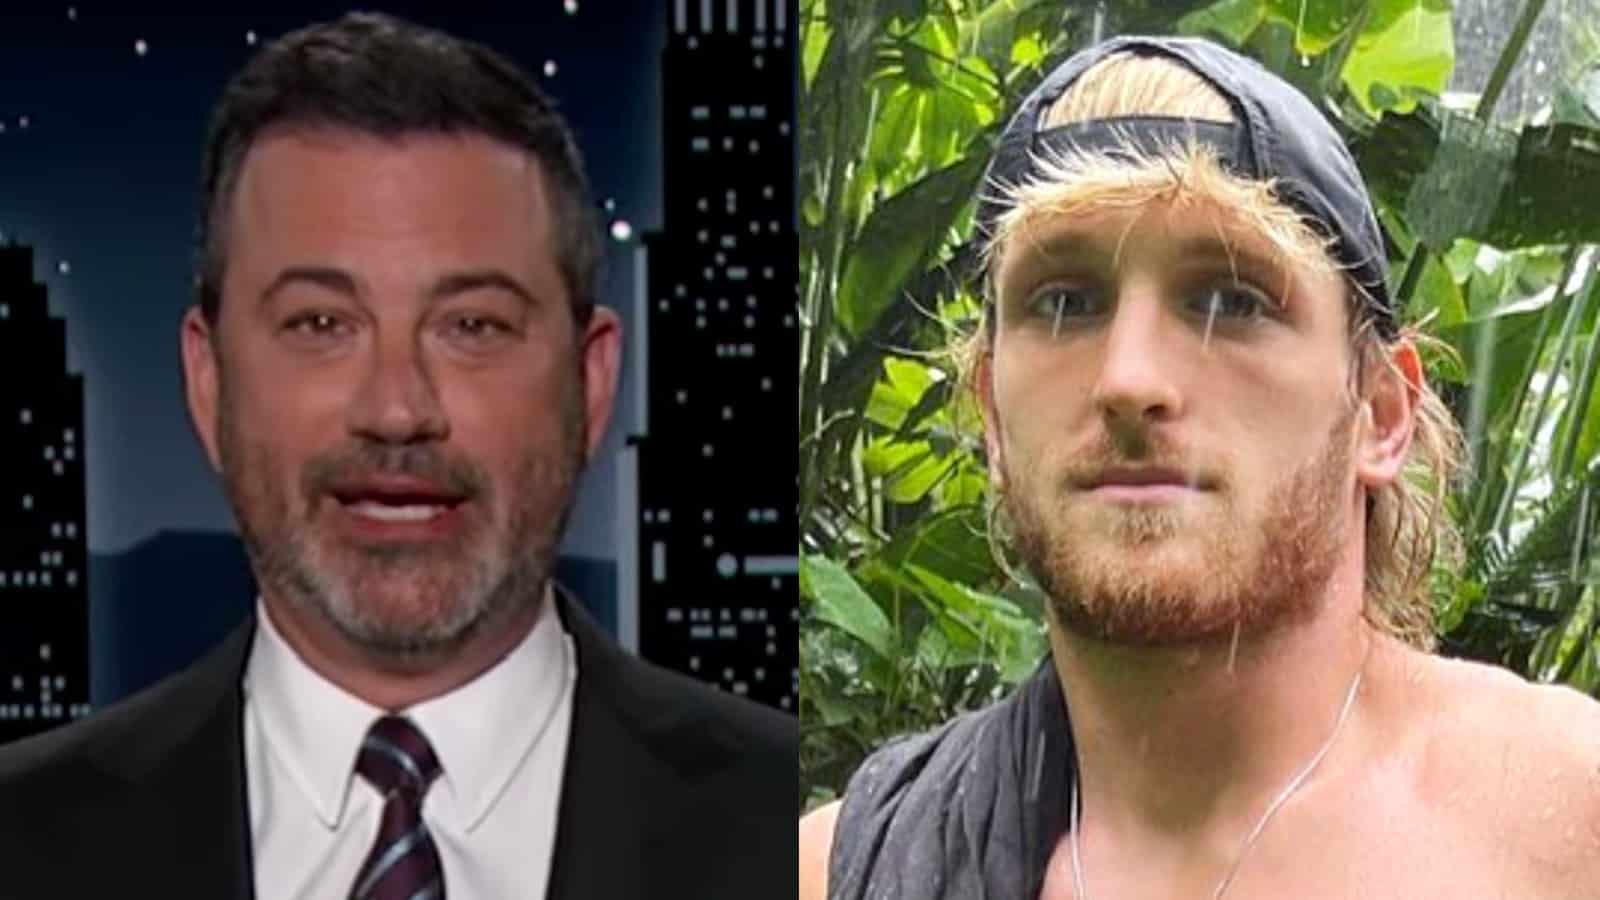 Jimmy Kimmel and Logan Paul next to each other